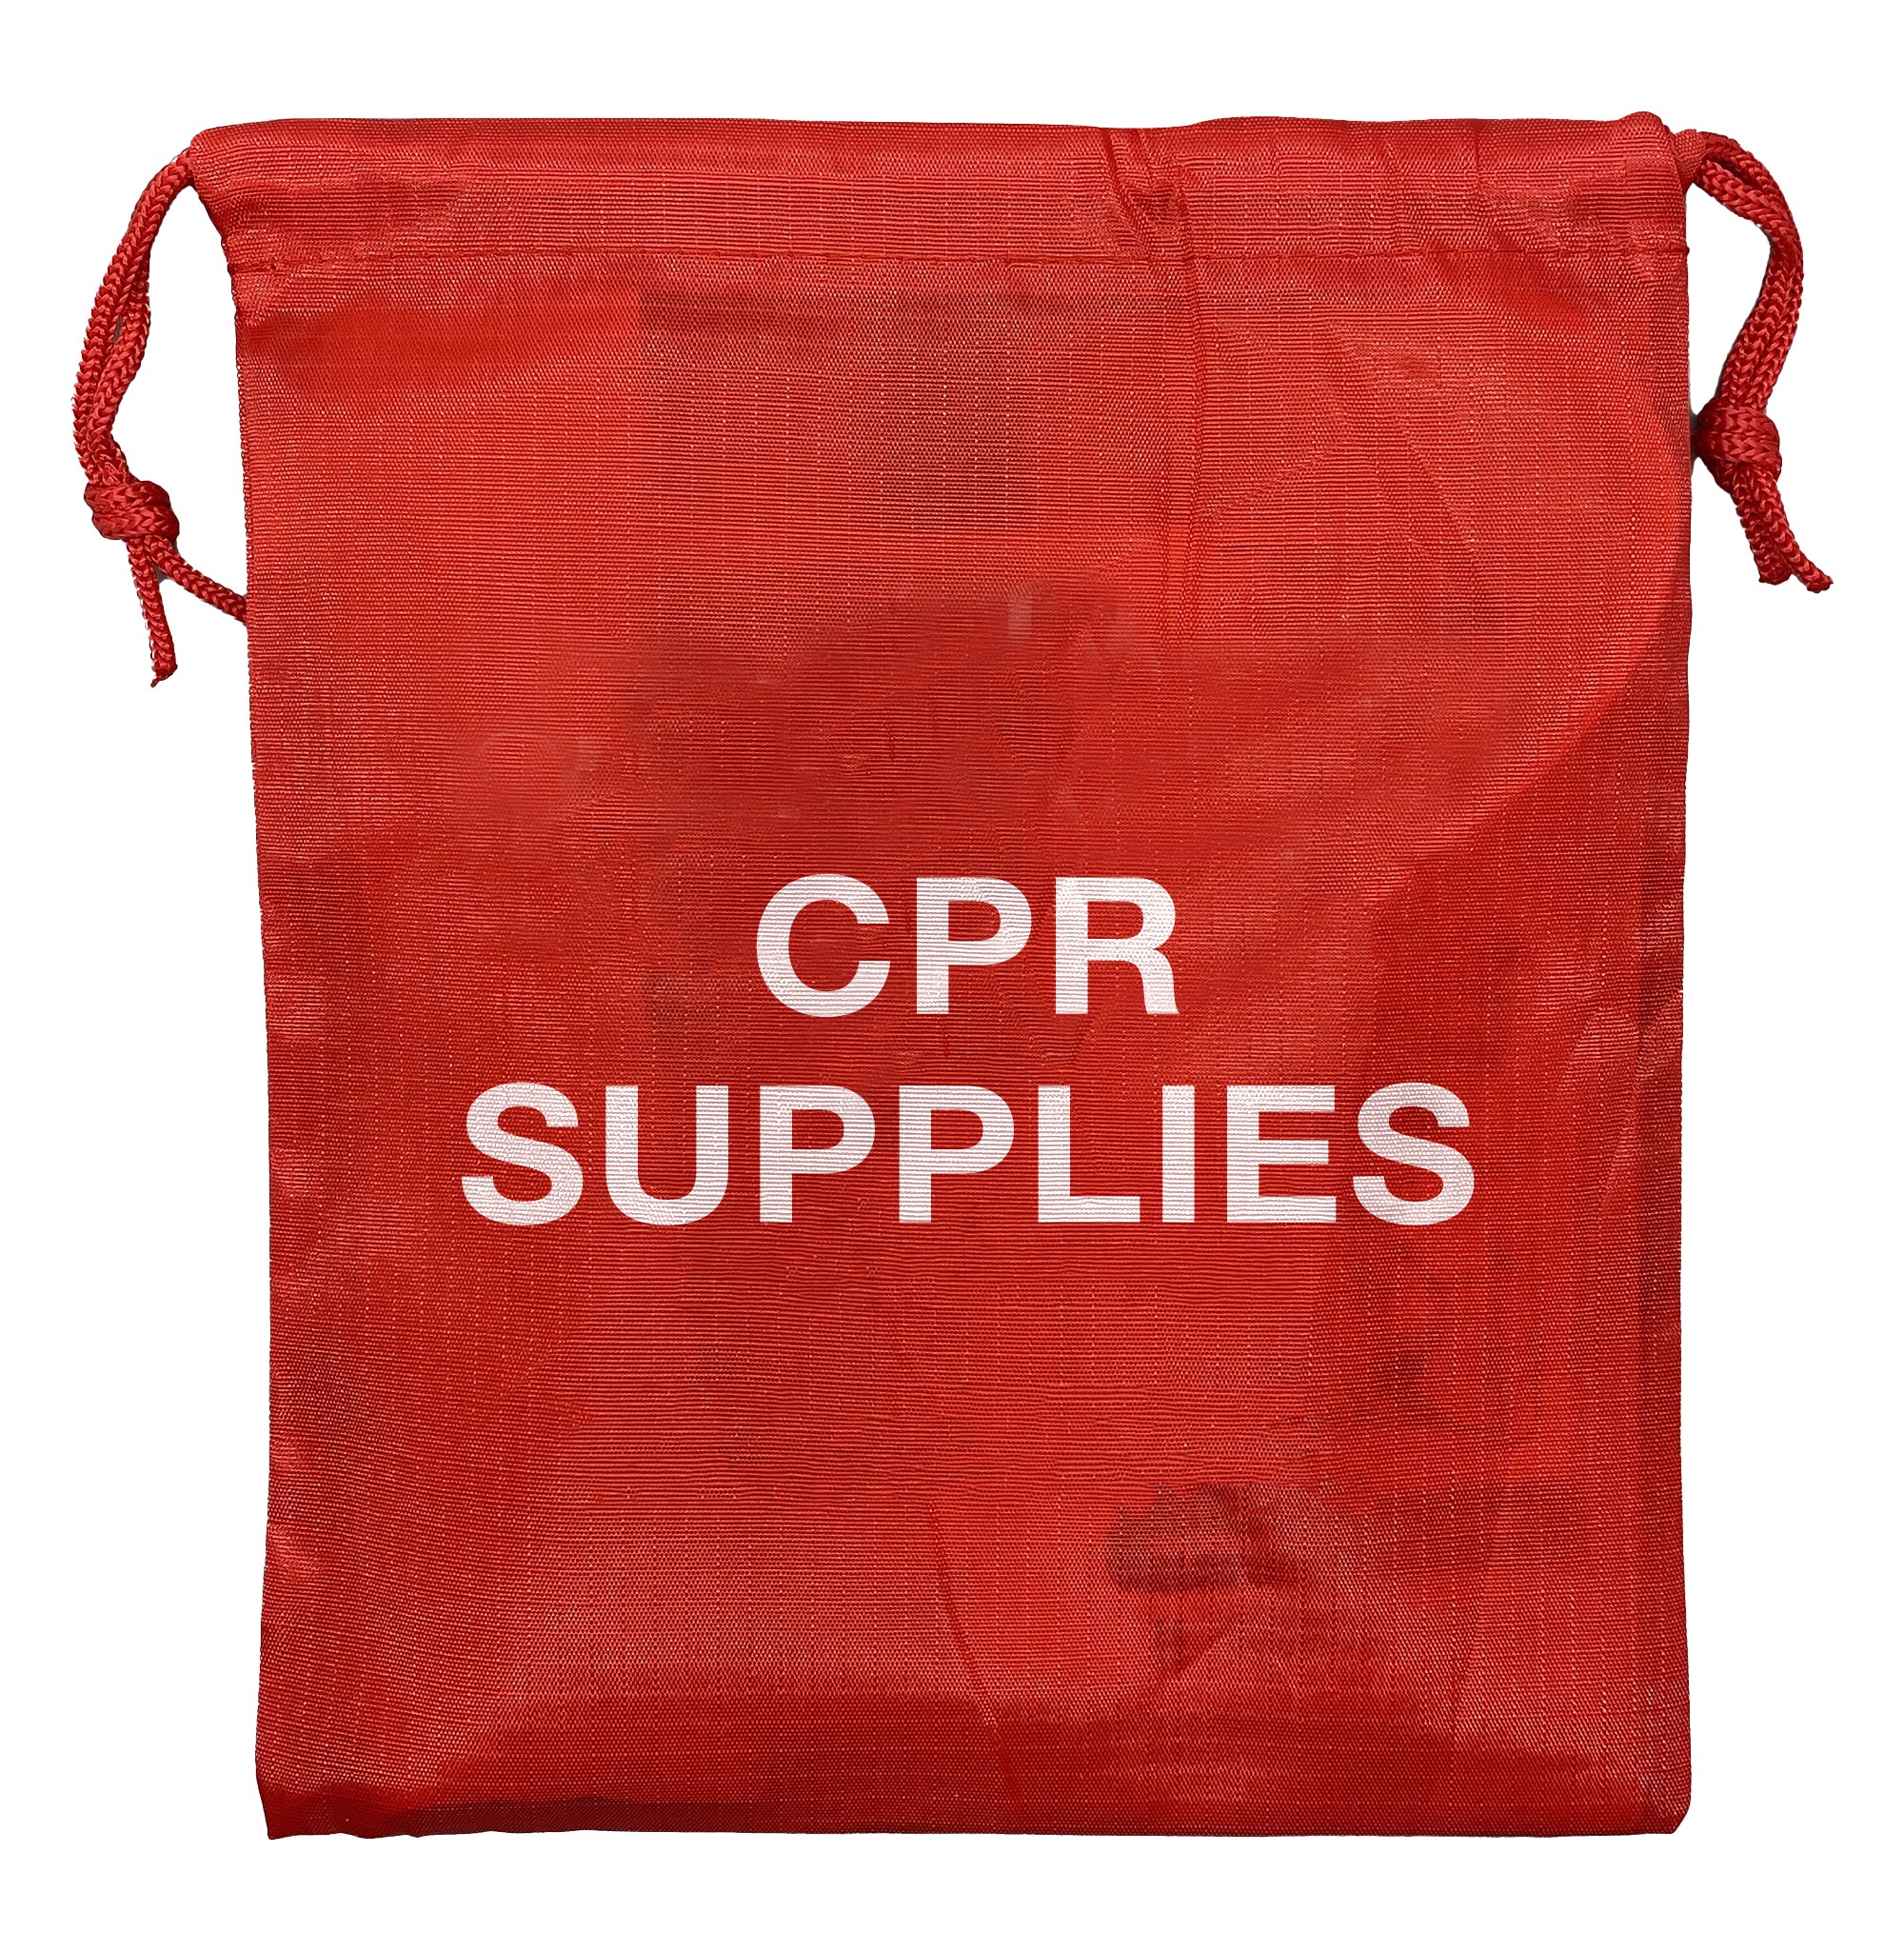 CPR Supplies Drawstring Pouch